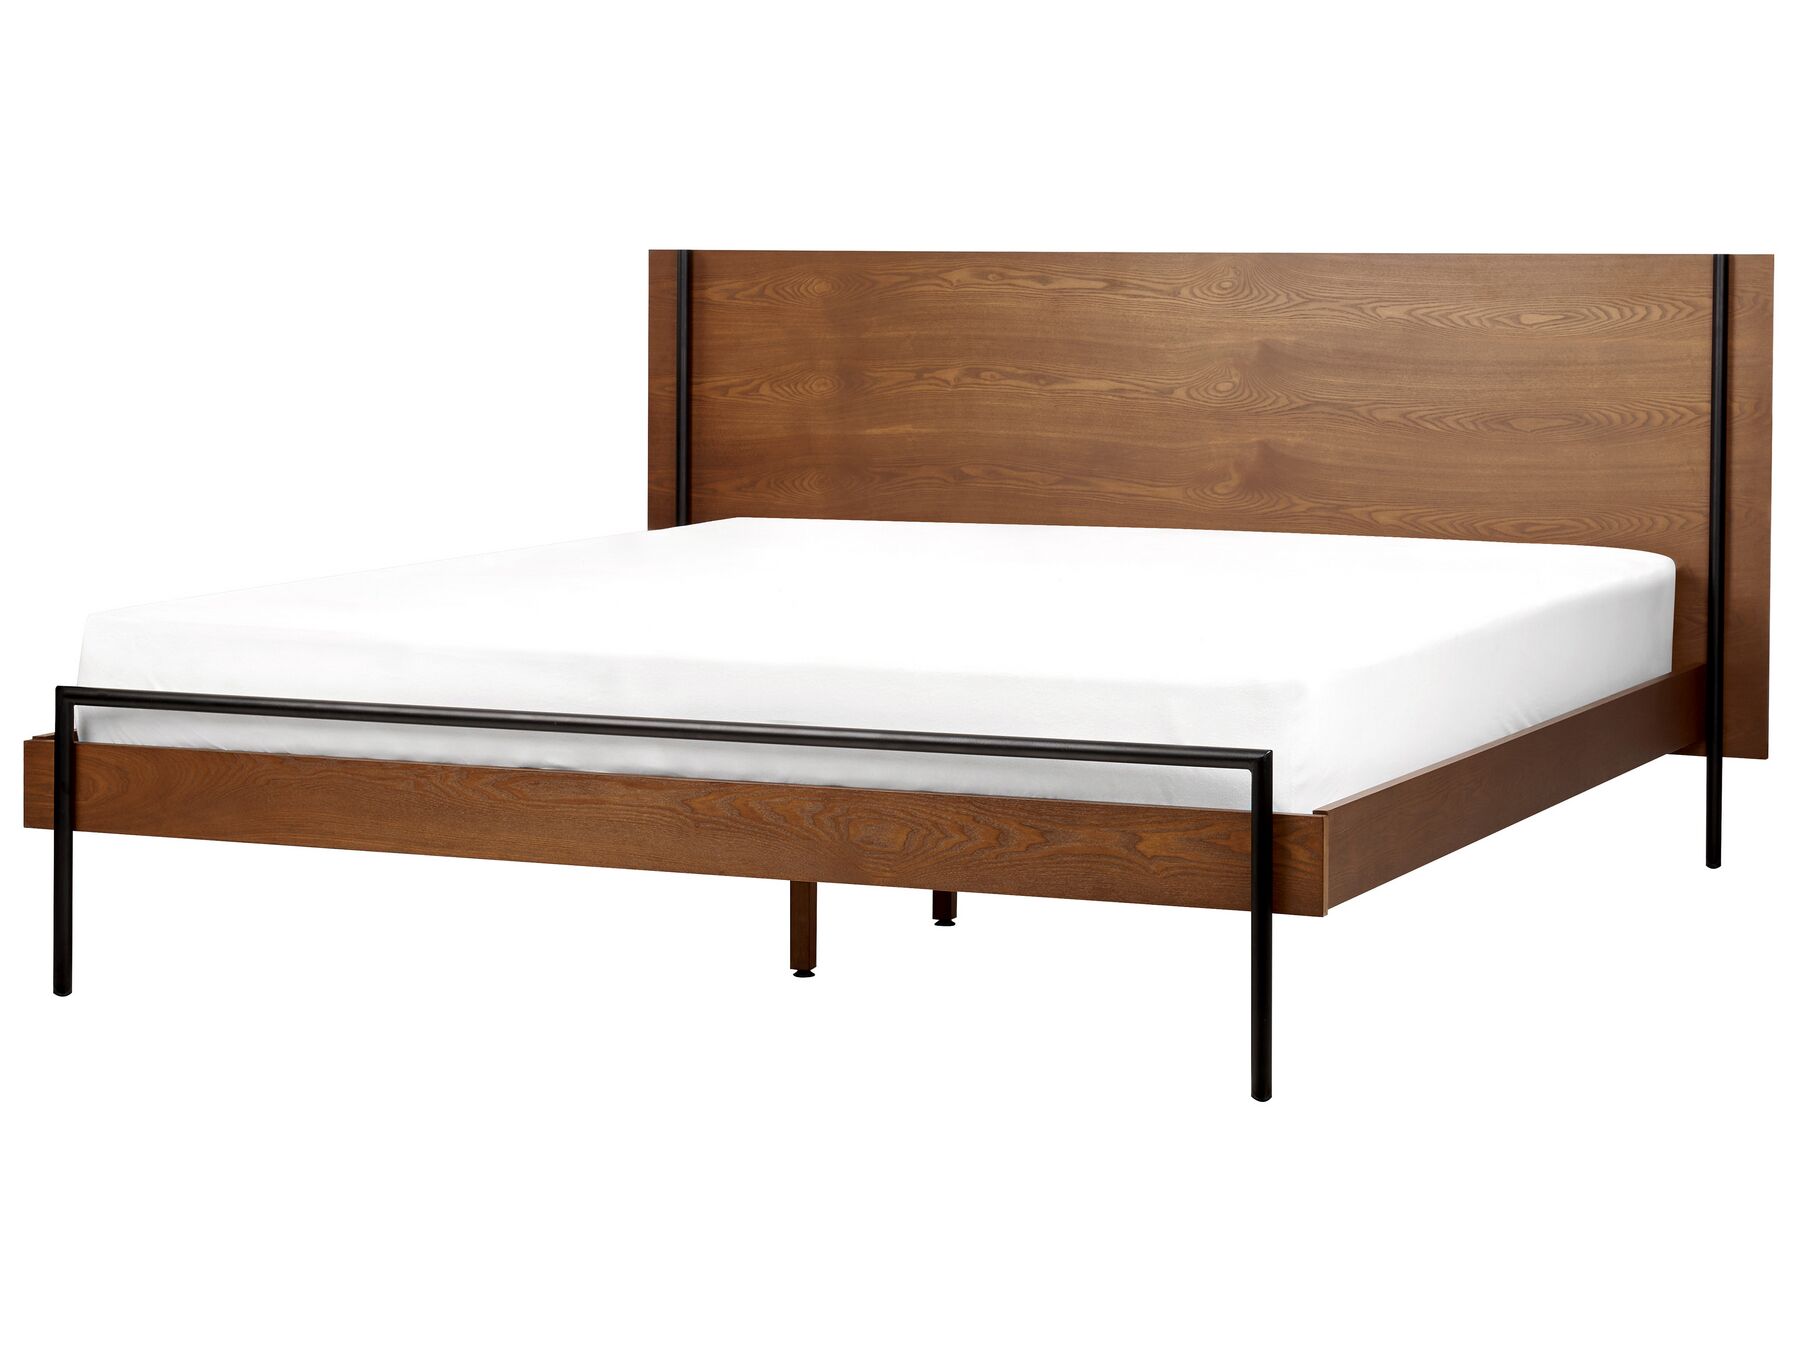 Bed hout donkerbruin 180 x 200 cm LIBERMONT_912710